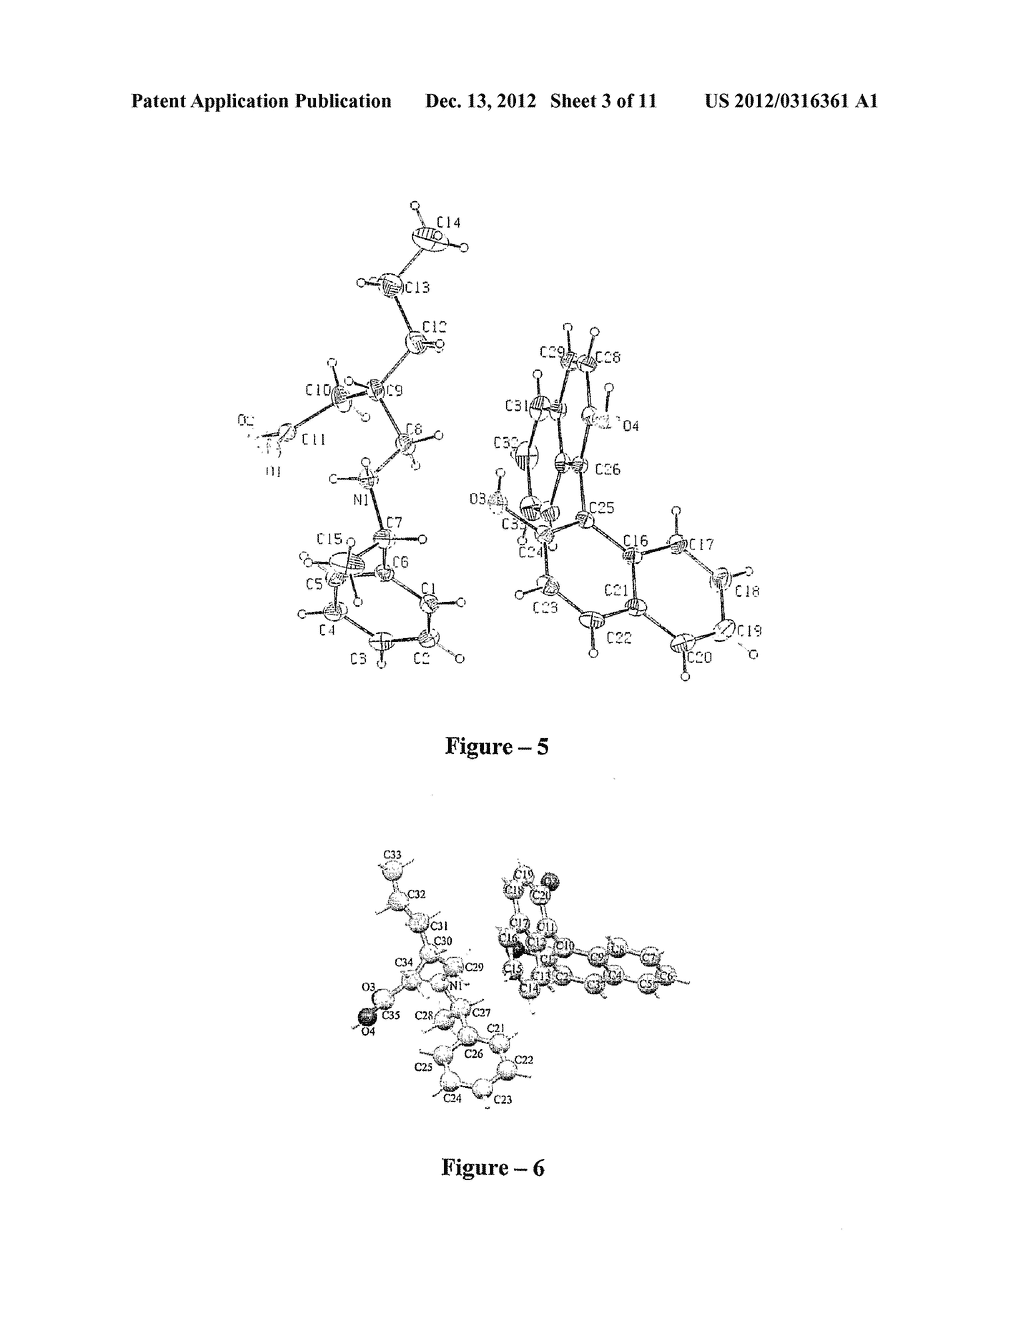 METHOD OF RESOLUTION OF (RS)- 1,1'-BI-2-NAPHTHOL FOR OBTAINING     ENANTIOMERIC PURE I.E. (S)-(-)-1,1'-BI-2-NAPHTHOL AND/OR     (R)-(+)-1,1'-BI-2-NAPHTHOL VIA CO-CRYSTAL FORMATION WITH OPTICALLY ACTIVE     DERIVATIVES OF y -AMINO ACIDS - diagram, schematic, and image 04